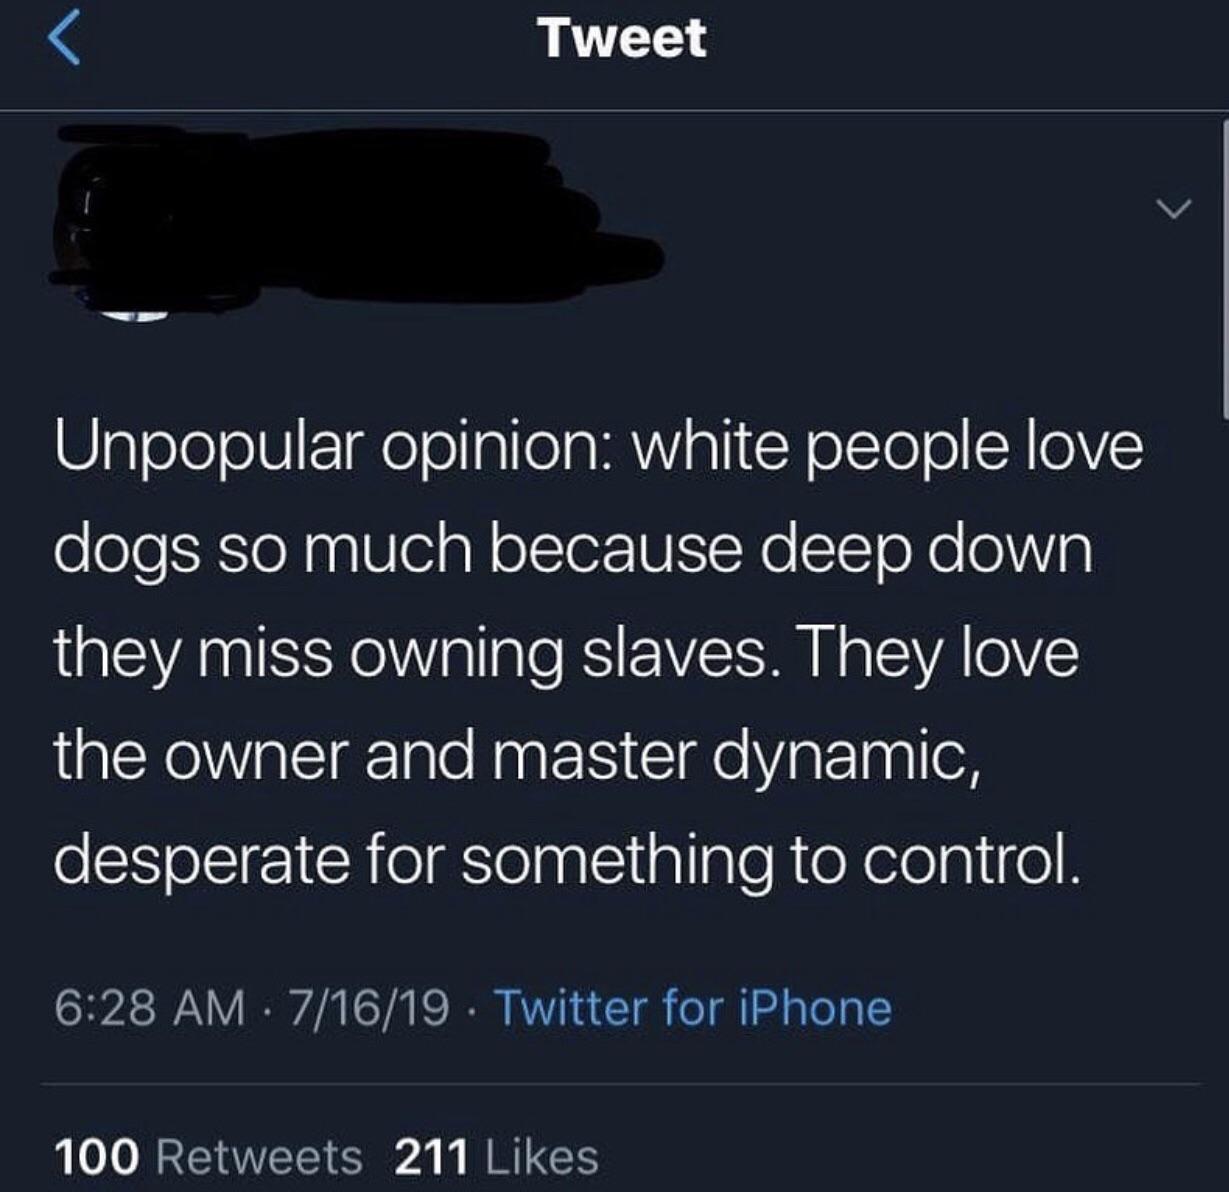 Tweet Unpopular opinion white people love dogs so much because deep down they miss owning slaves. They love the owner and master dynamic, desperate for something to control.  Twitter for iPhone